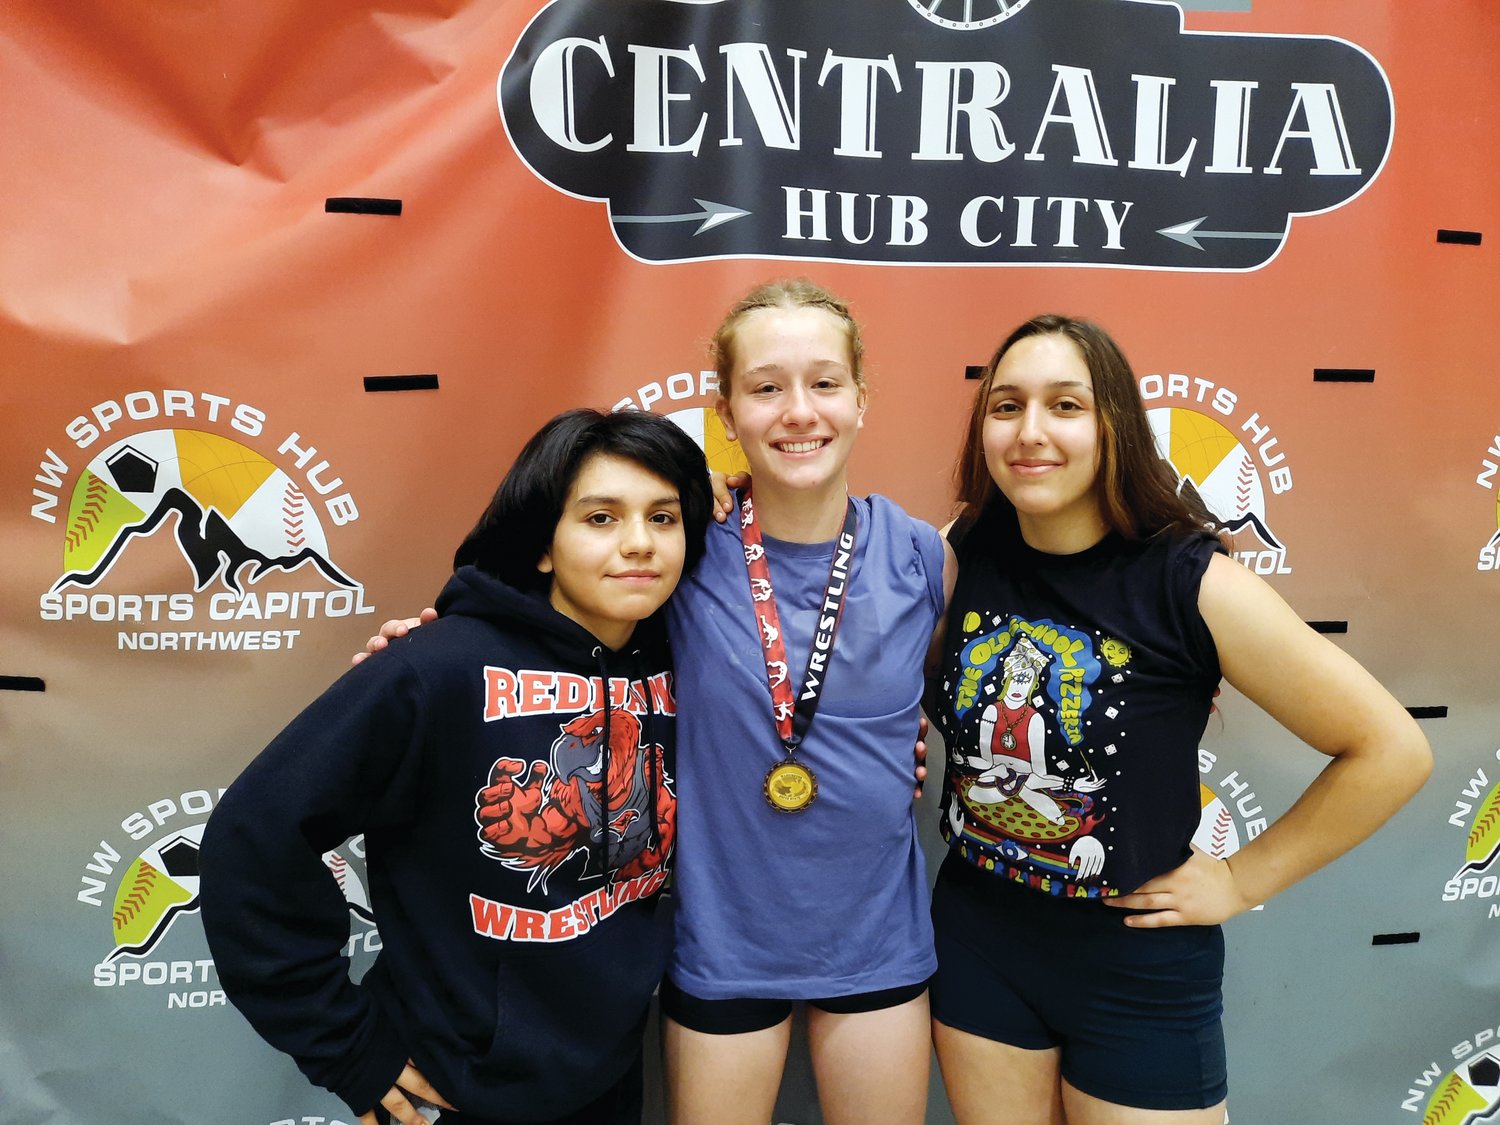 Lily Delgado, Savannah Hoffman, and Chloe Lampert gather for a photo at the Super State Wrestling championship in Centralia.